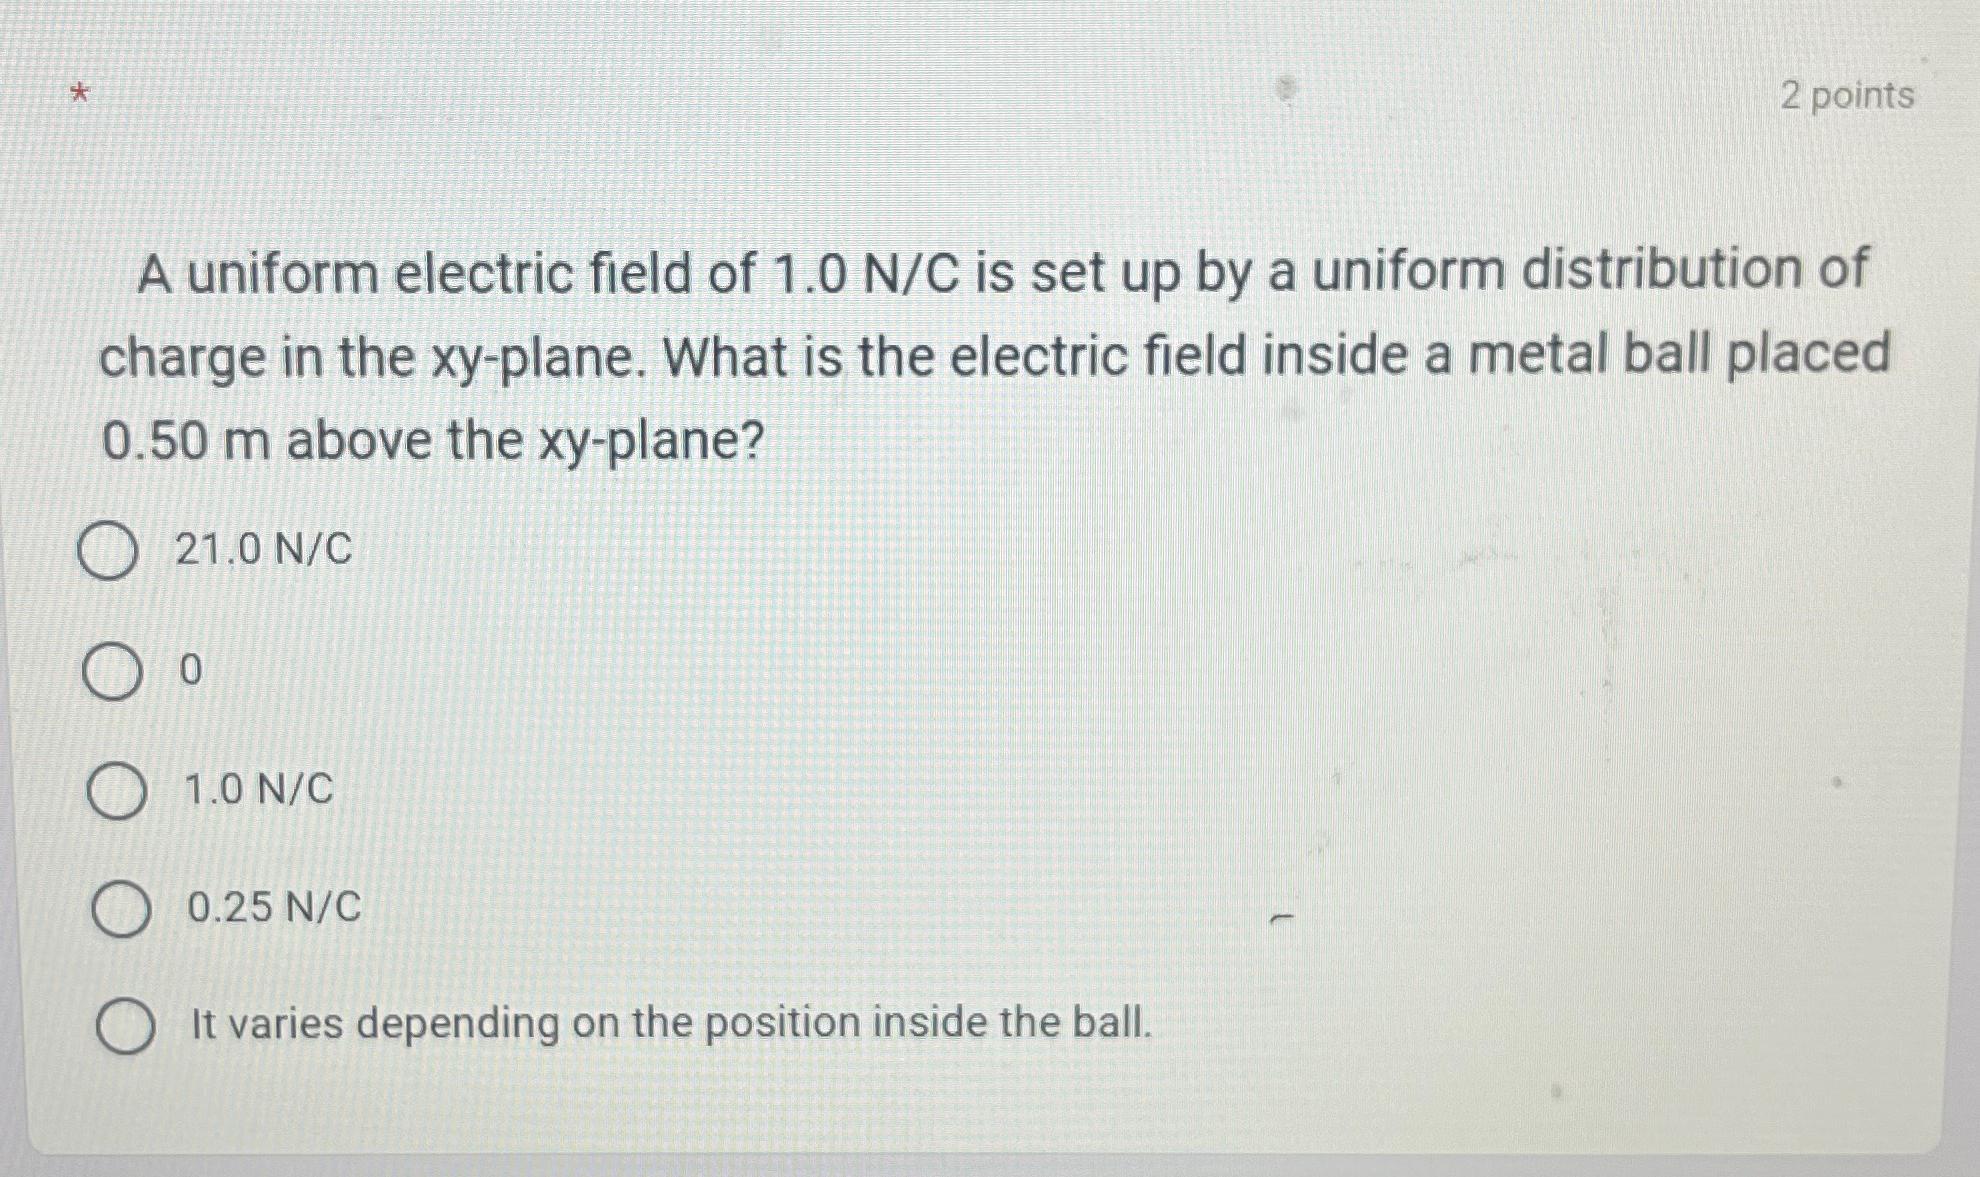 * A uniform electric field of 1.0 N/C is set up by a uniform distribution of charge in the xy-plane. What is